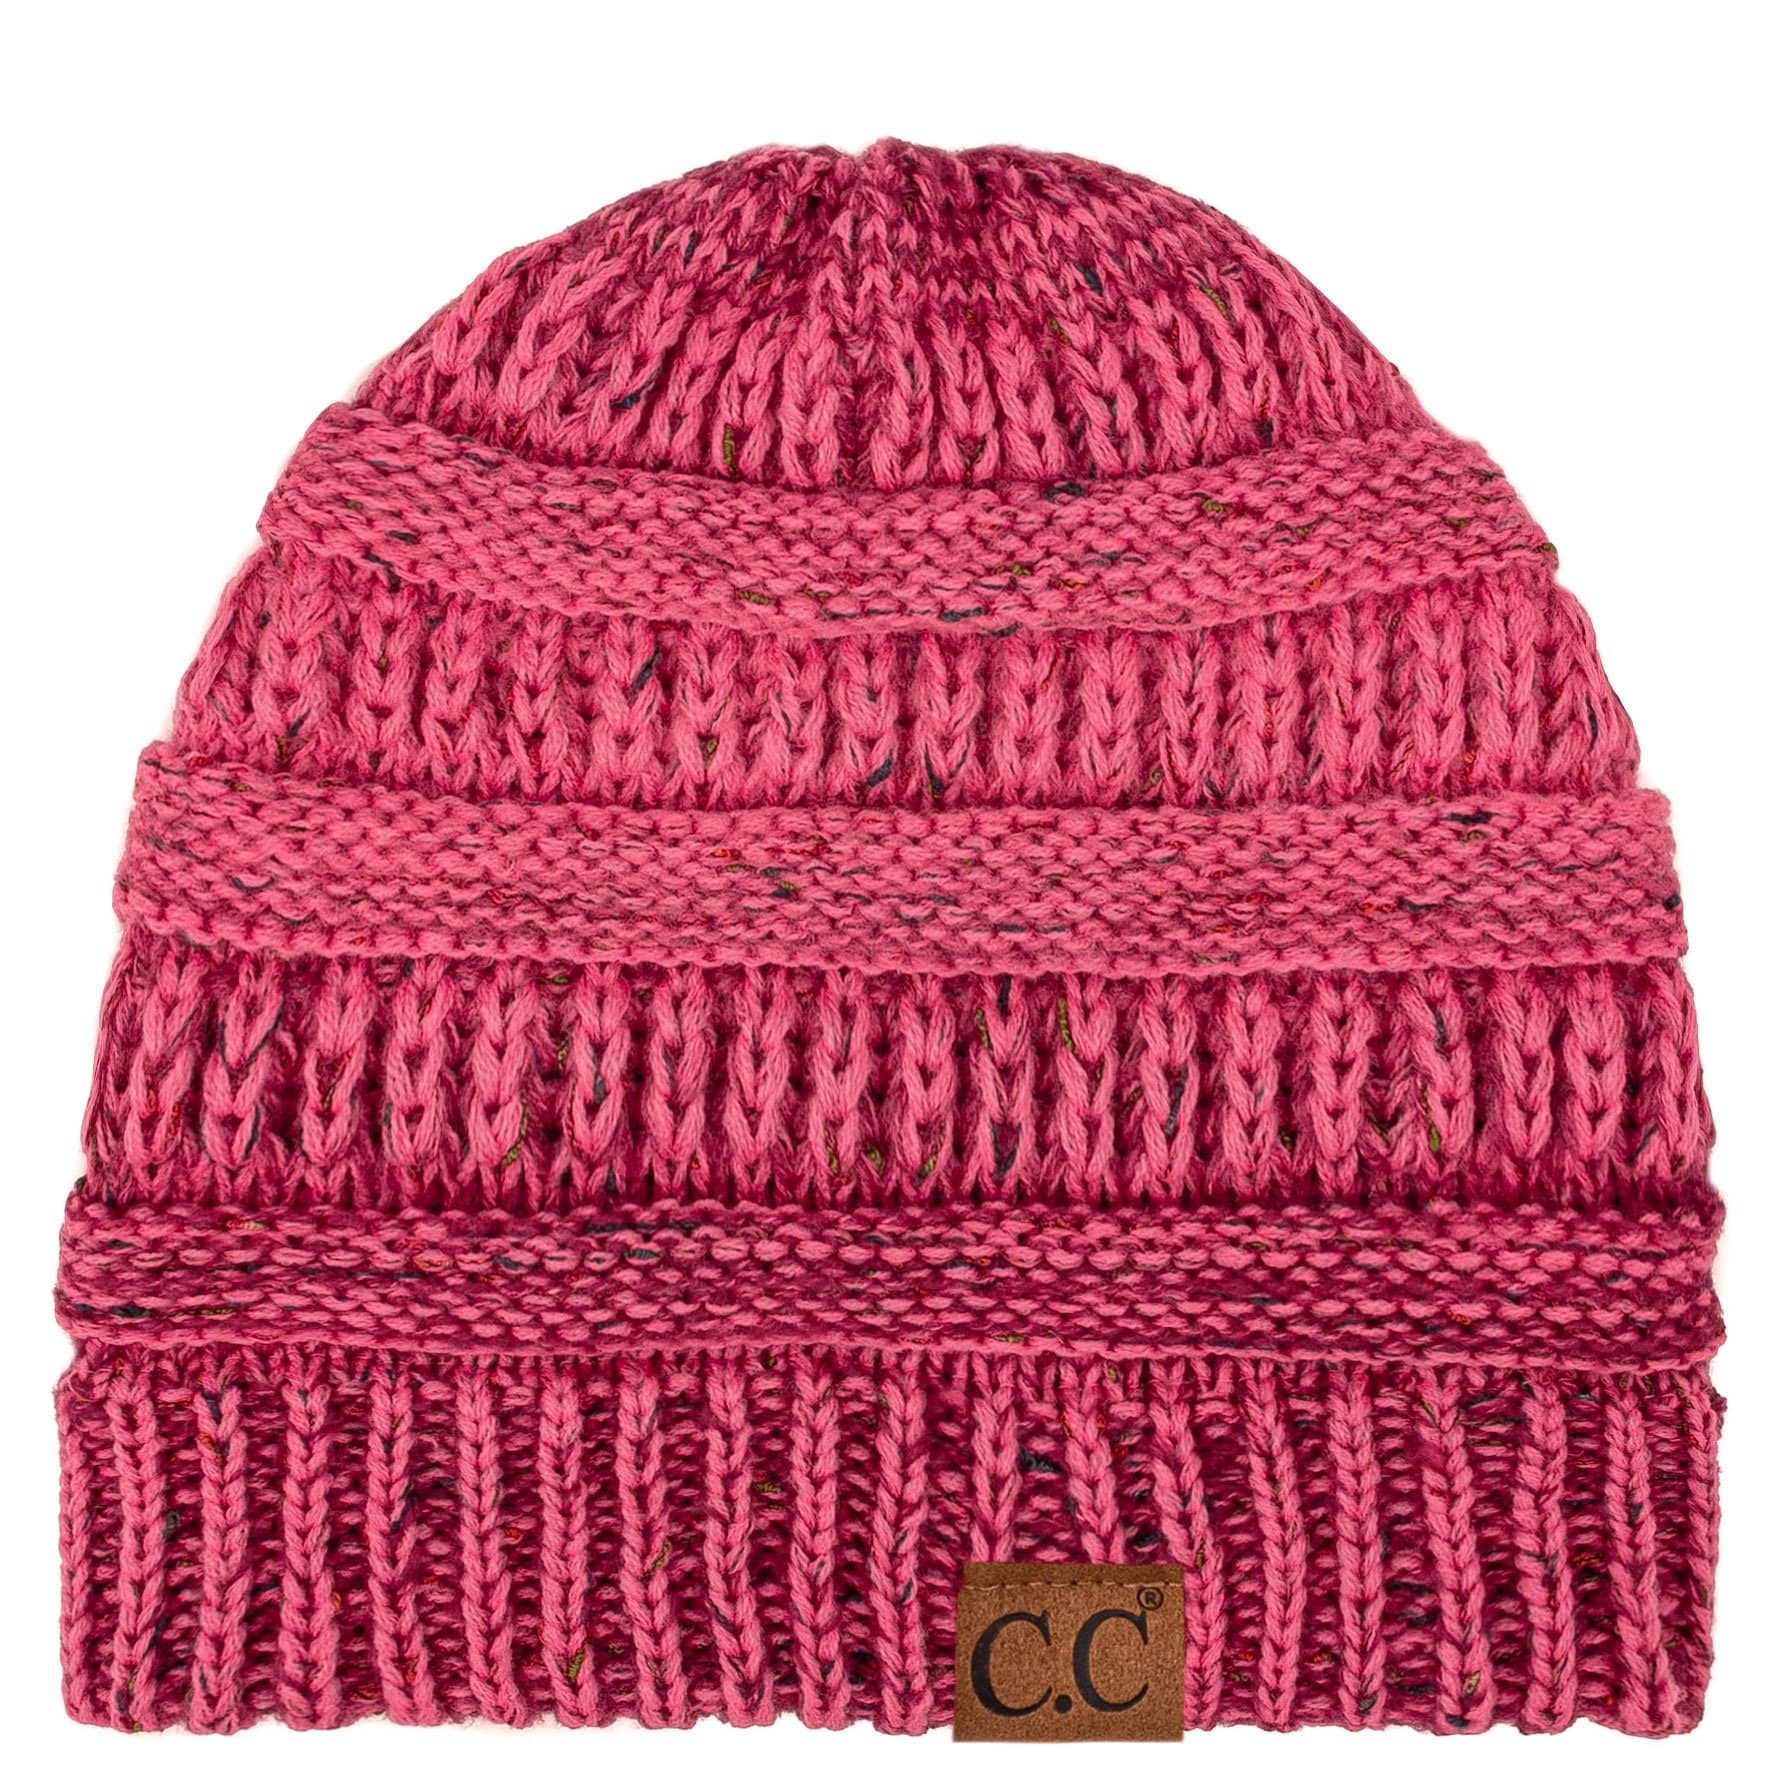 C.C Apparel Ombre Bubblegum Pink C.C Trendy Warm Chunky Soft Stretch Ombre Cable Knit Beanie Skully